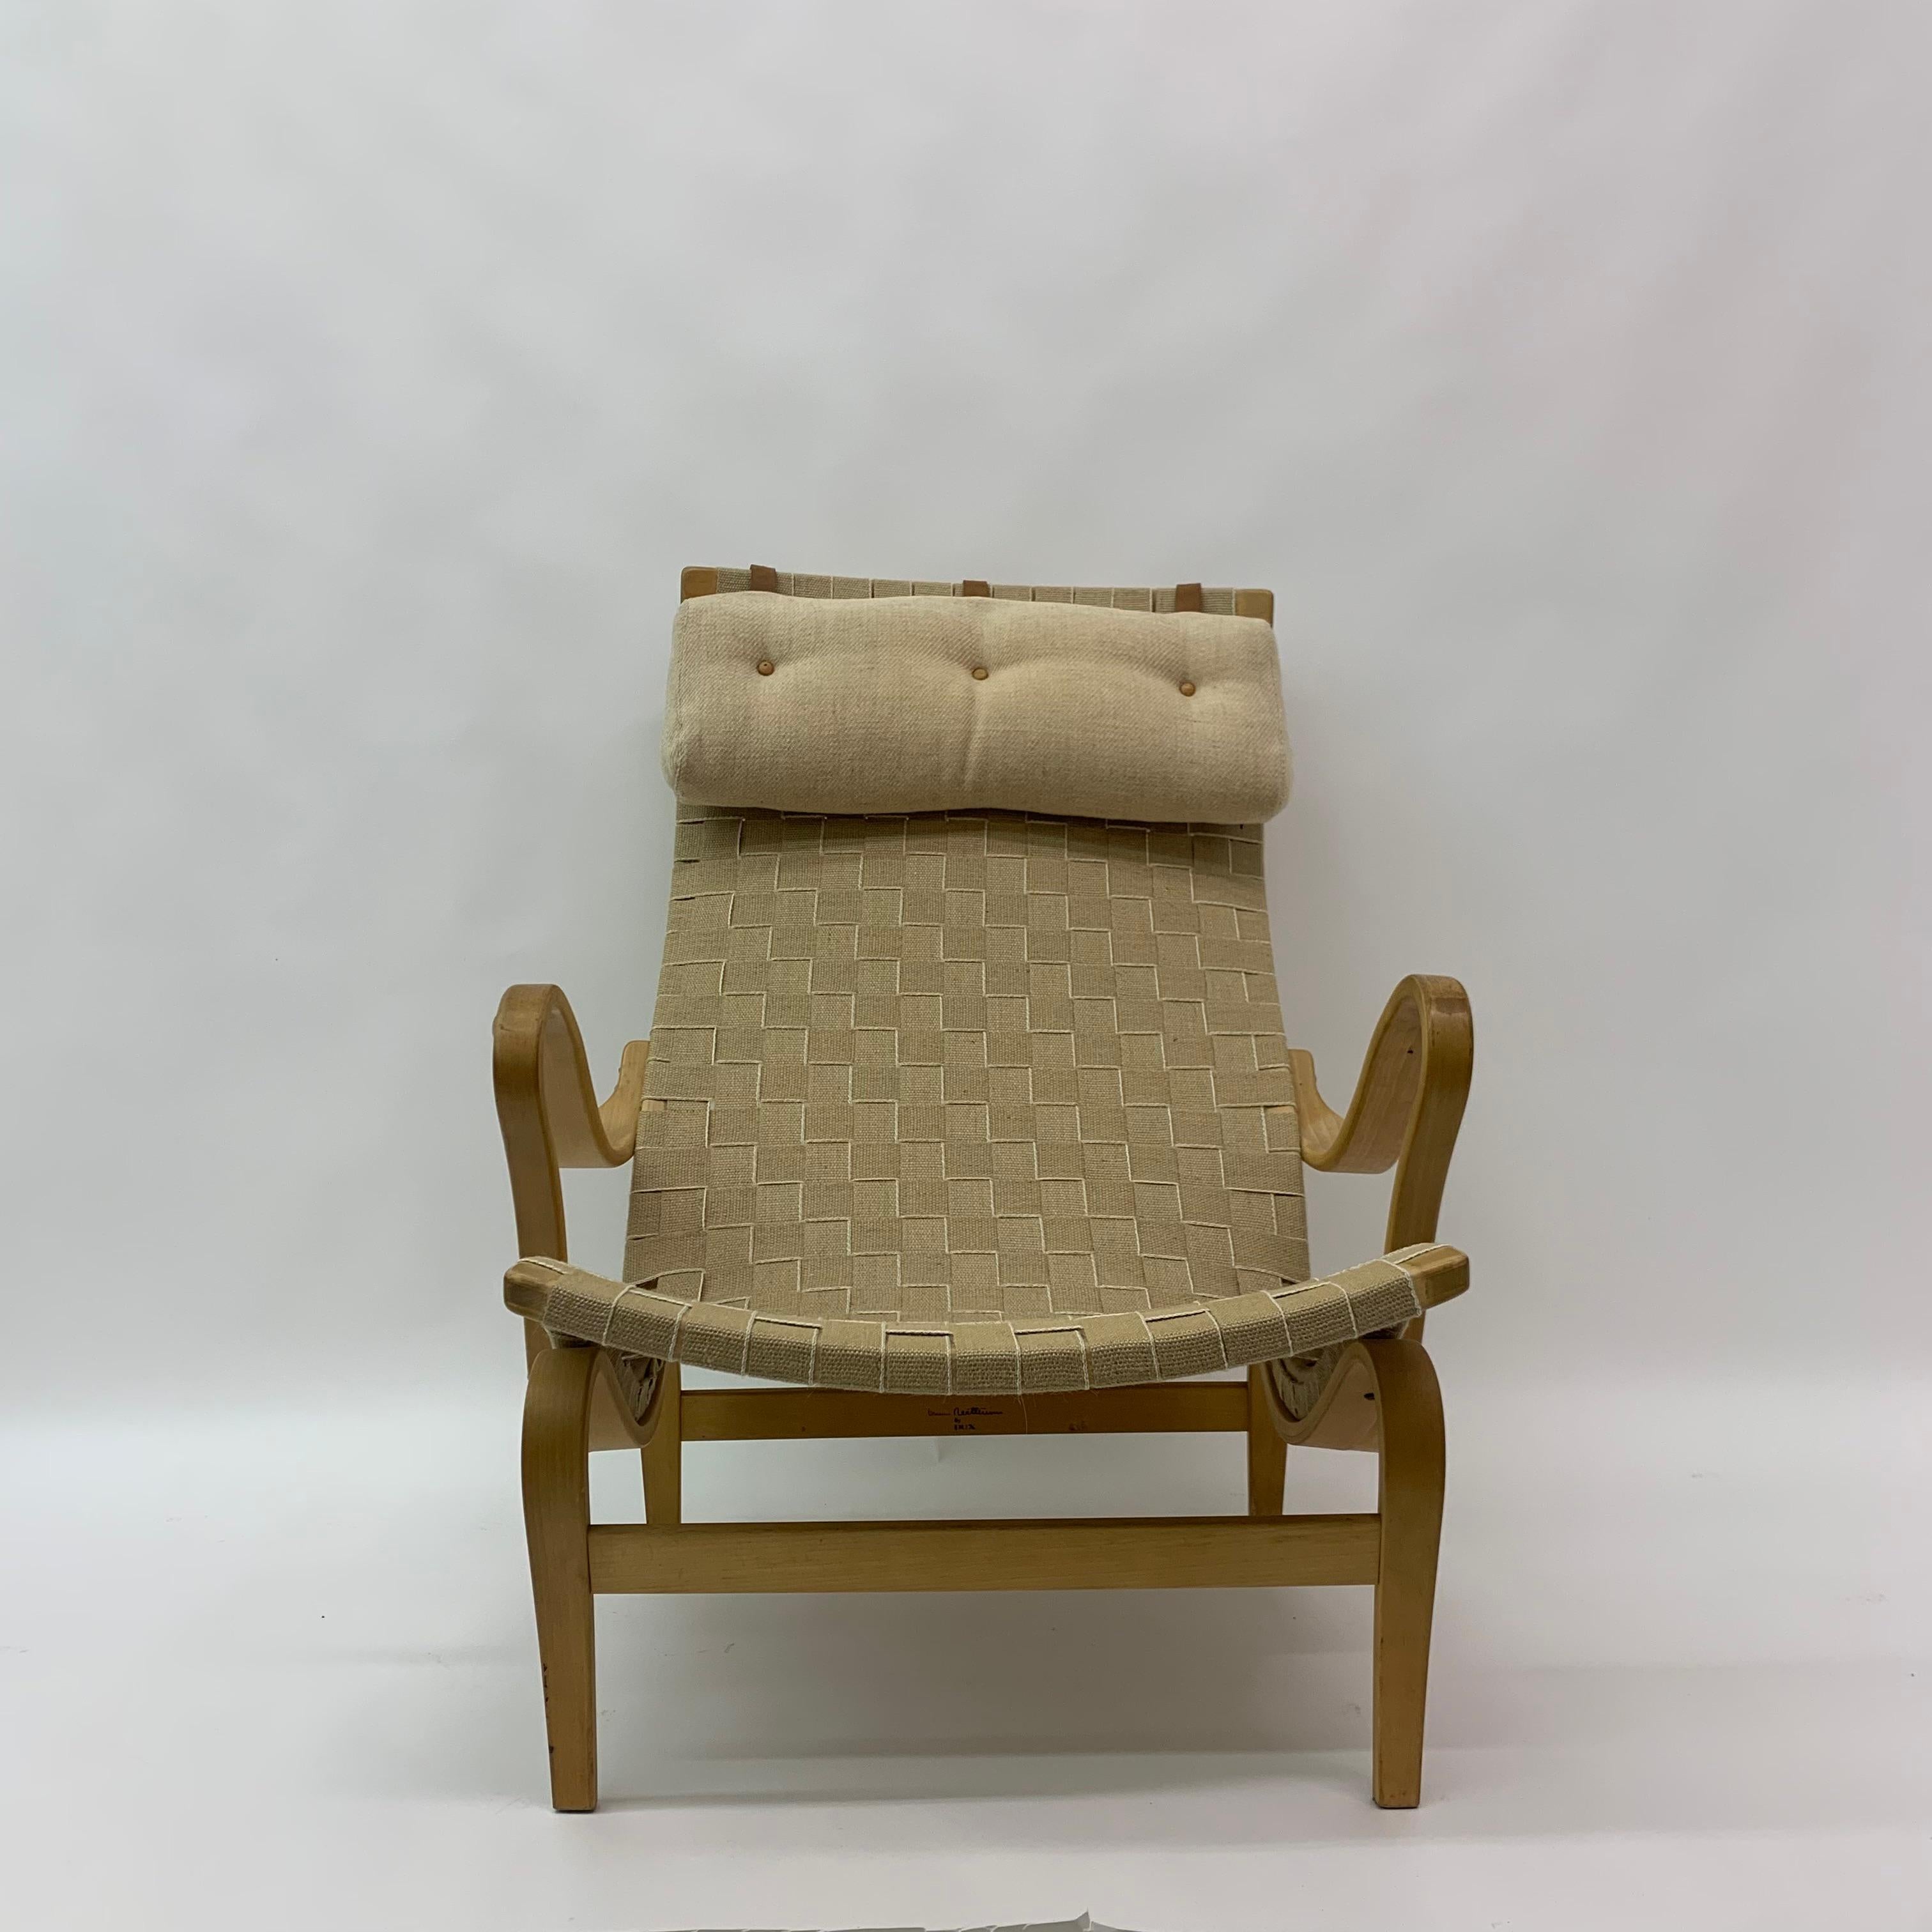 Bruno Mathsson ‘Pernilla’ chair for Dux, 1970's 
An eye catcher in your home.